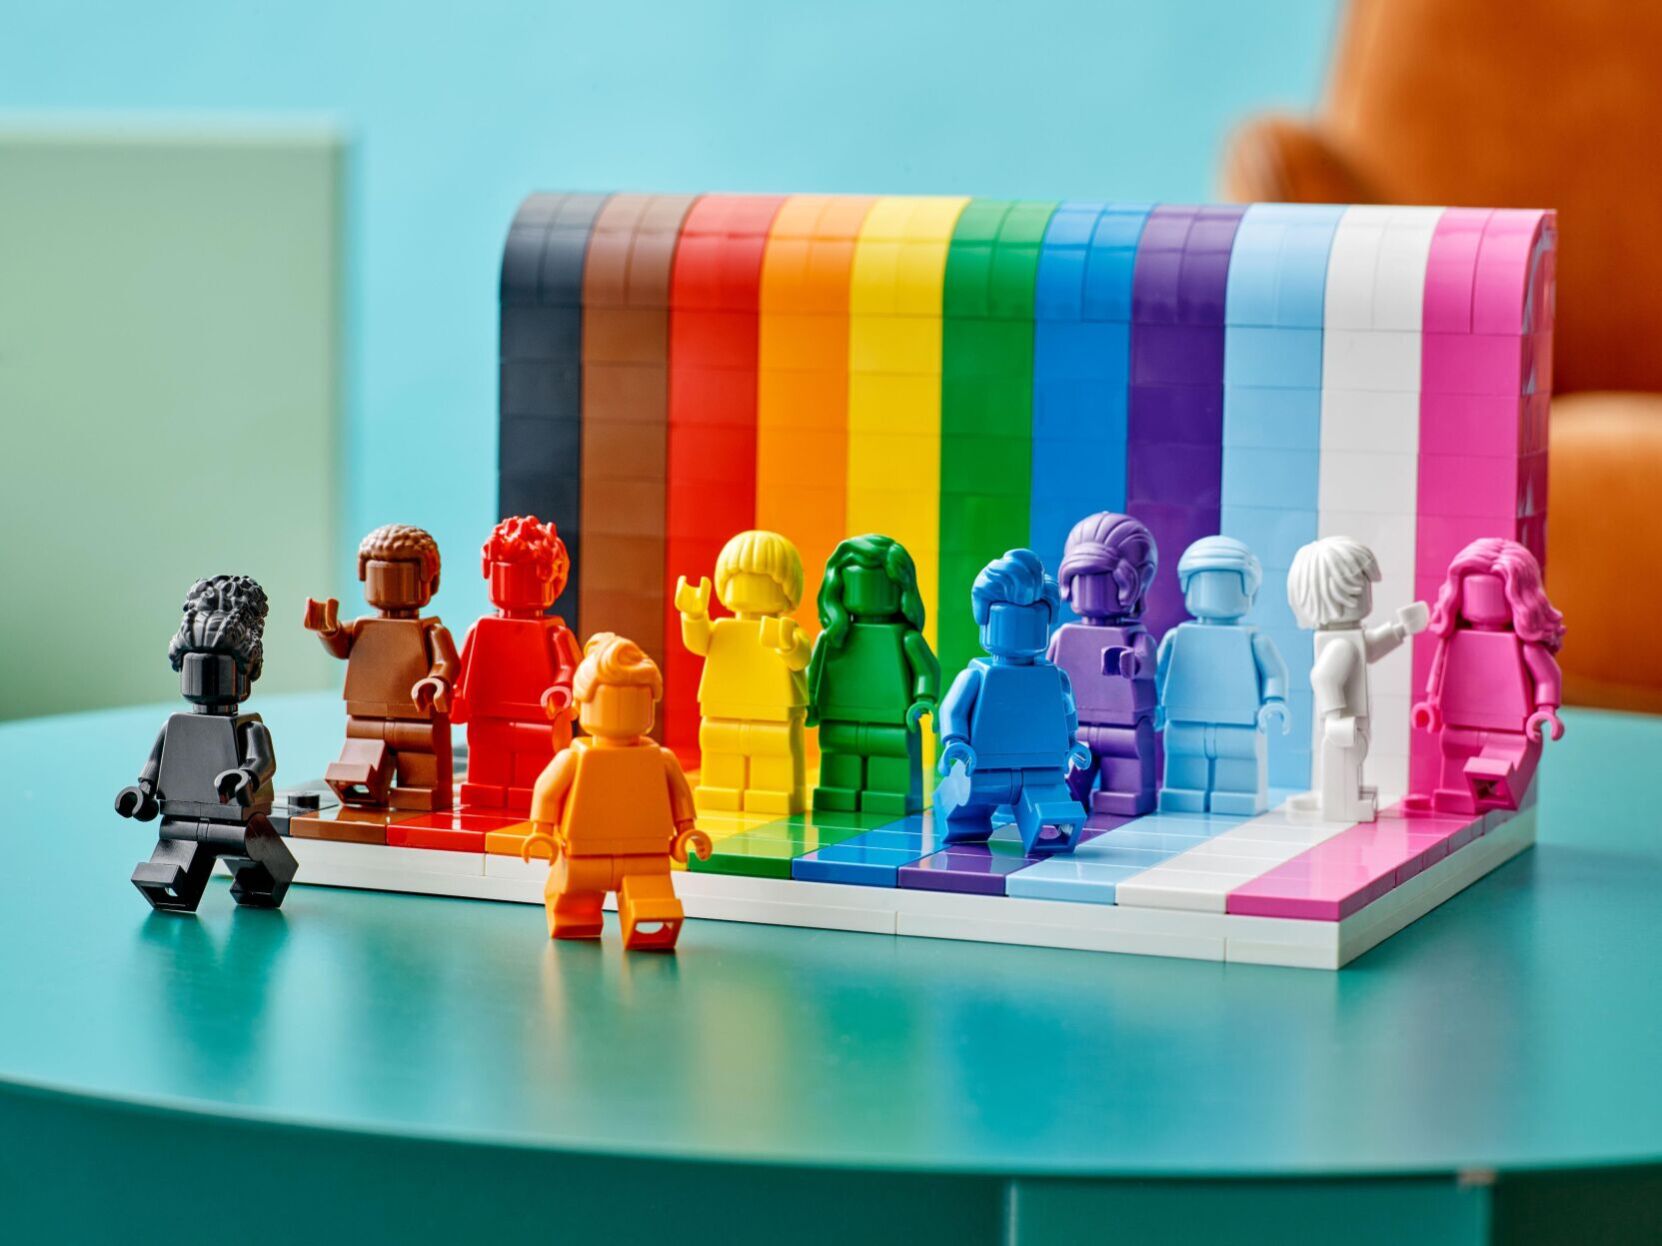 Lego unveils first LGBTQ set ahead of Pride Month pic